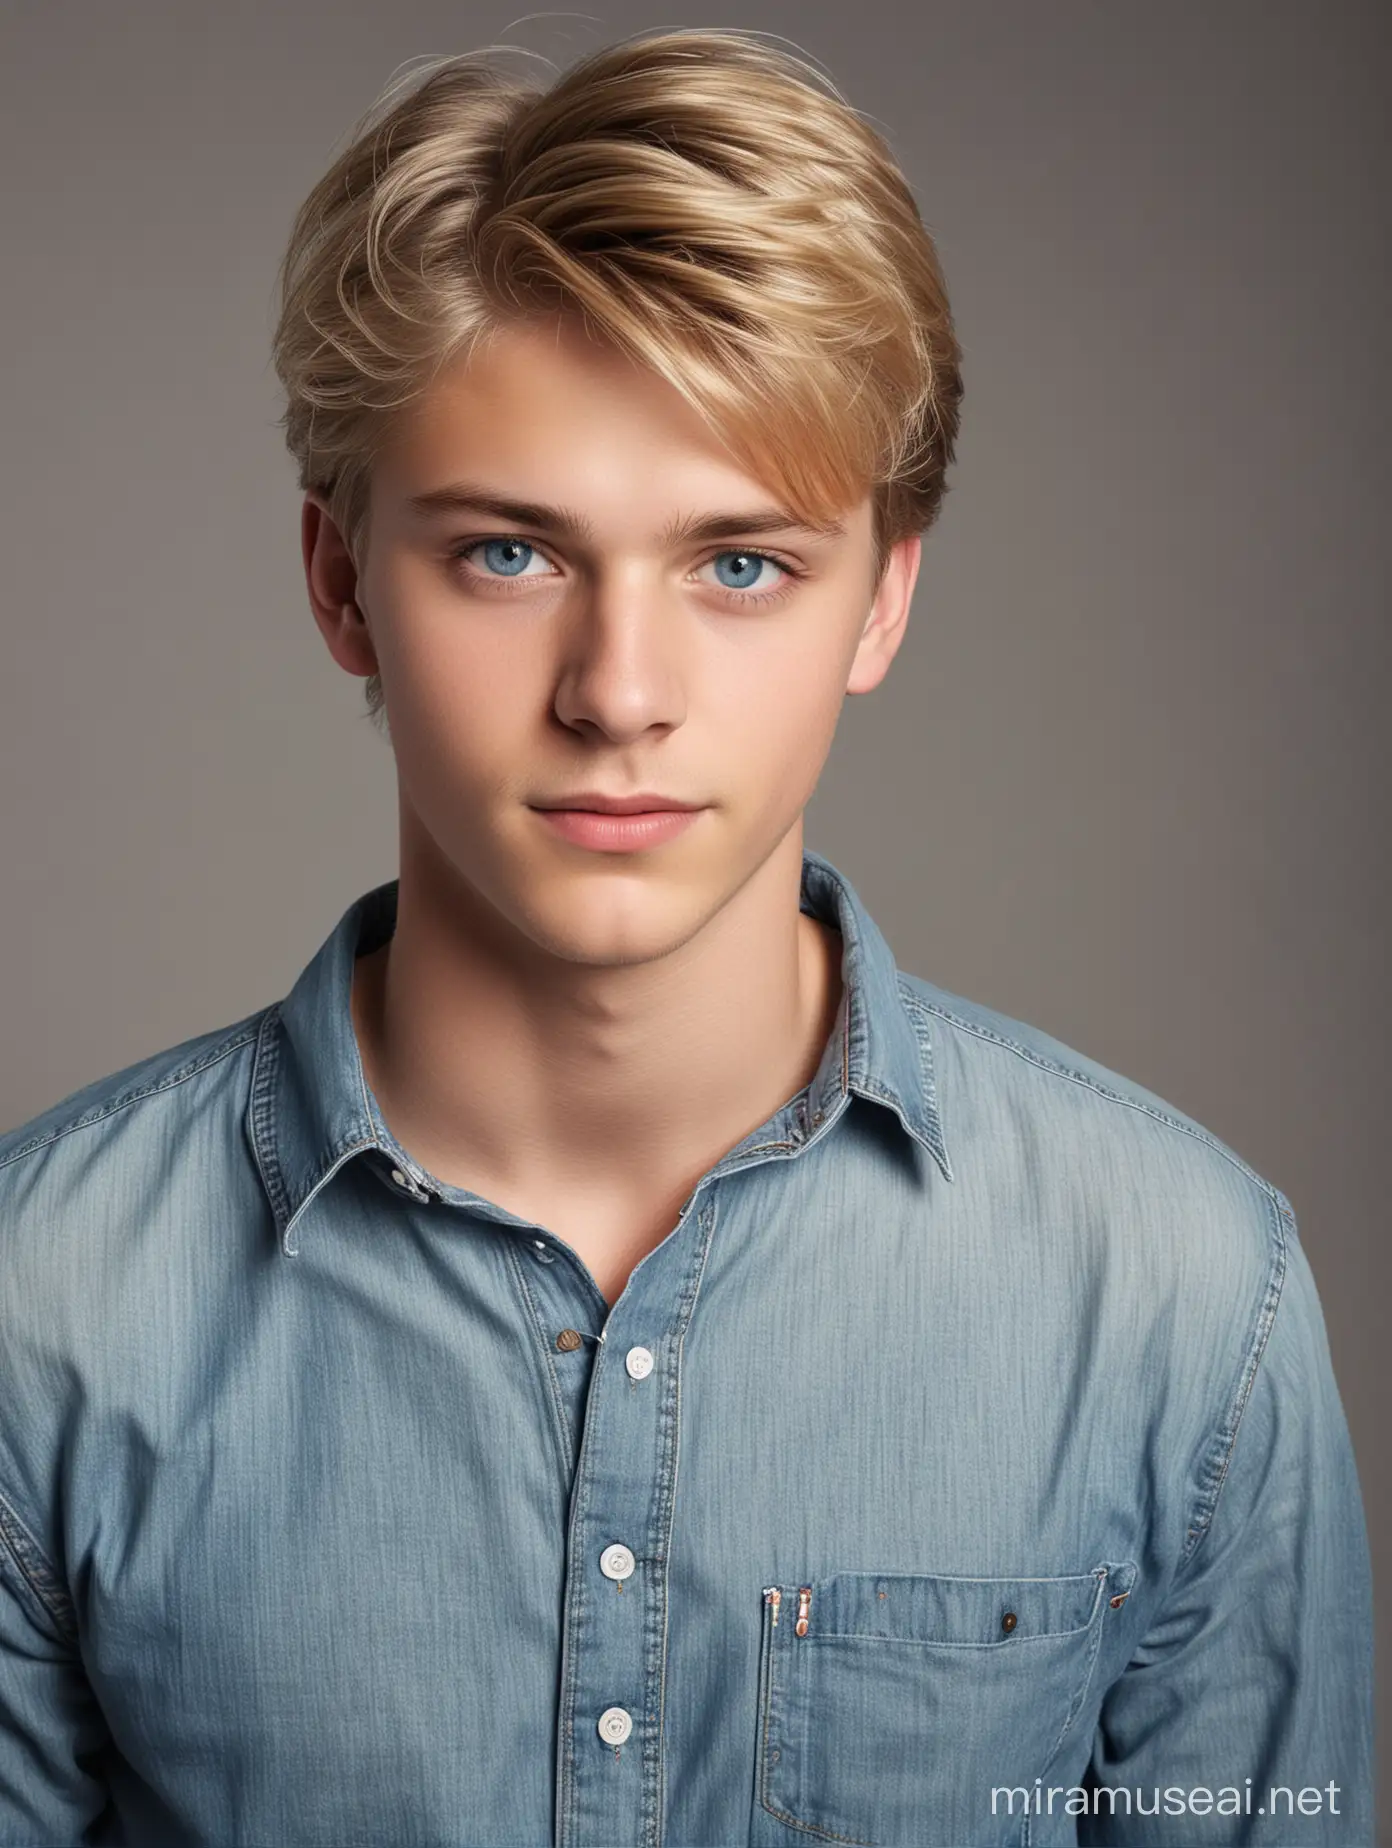 Handsome Blond Teenager in Denim Shirt Stylish Young Man with Blue Eyes